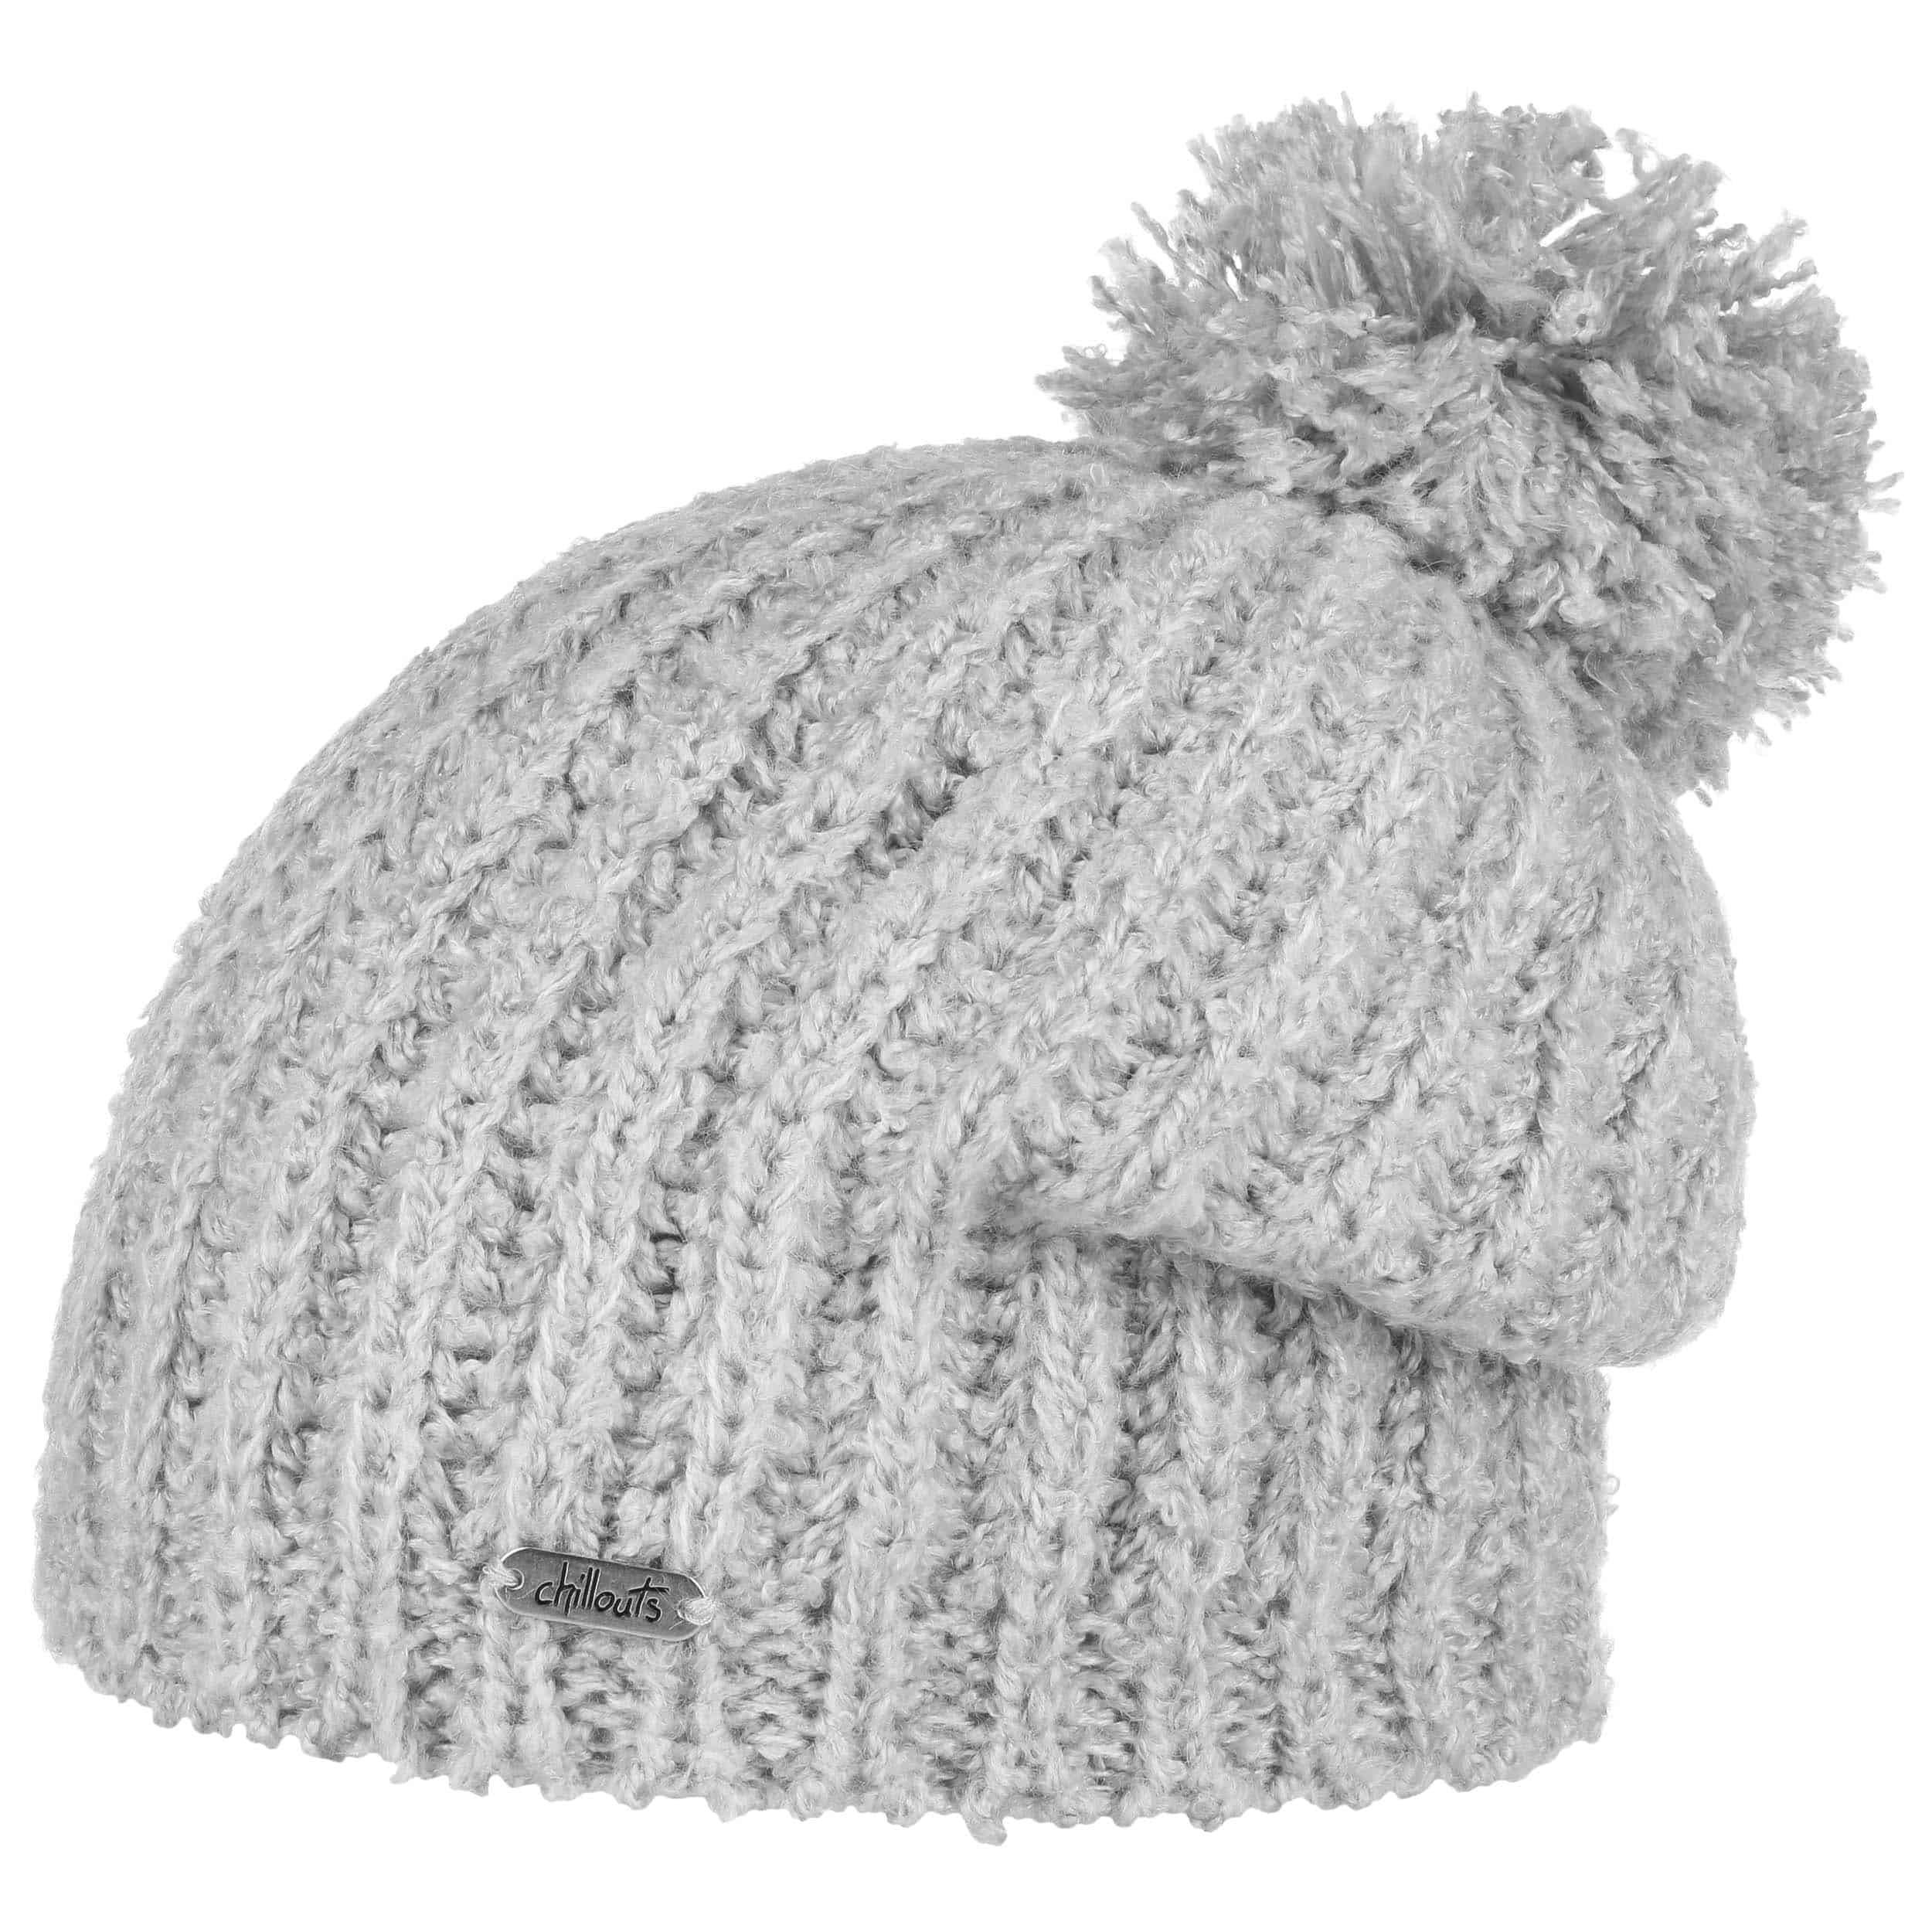 Cuddly Beanie Hat by Knit Chillouts 21,95 - £